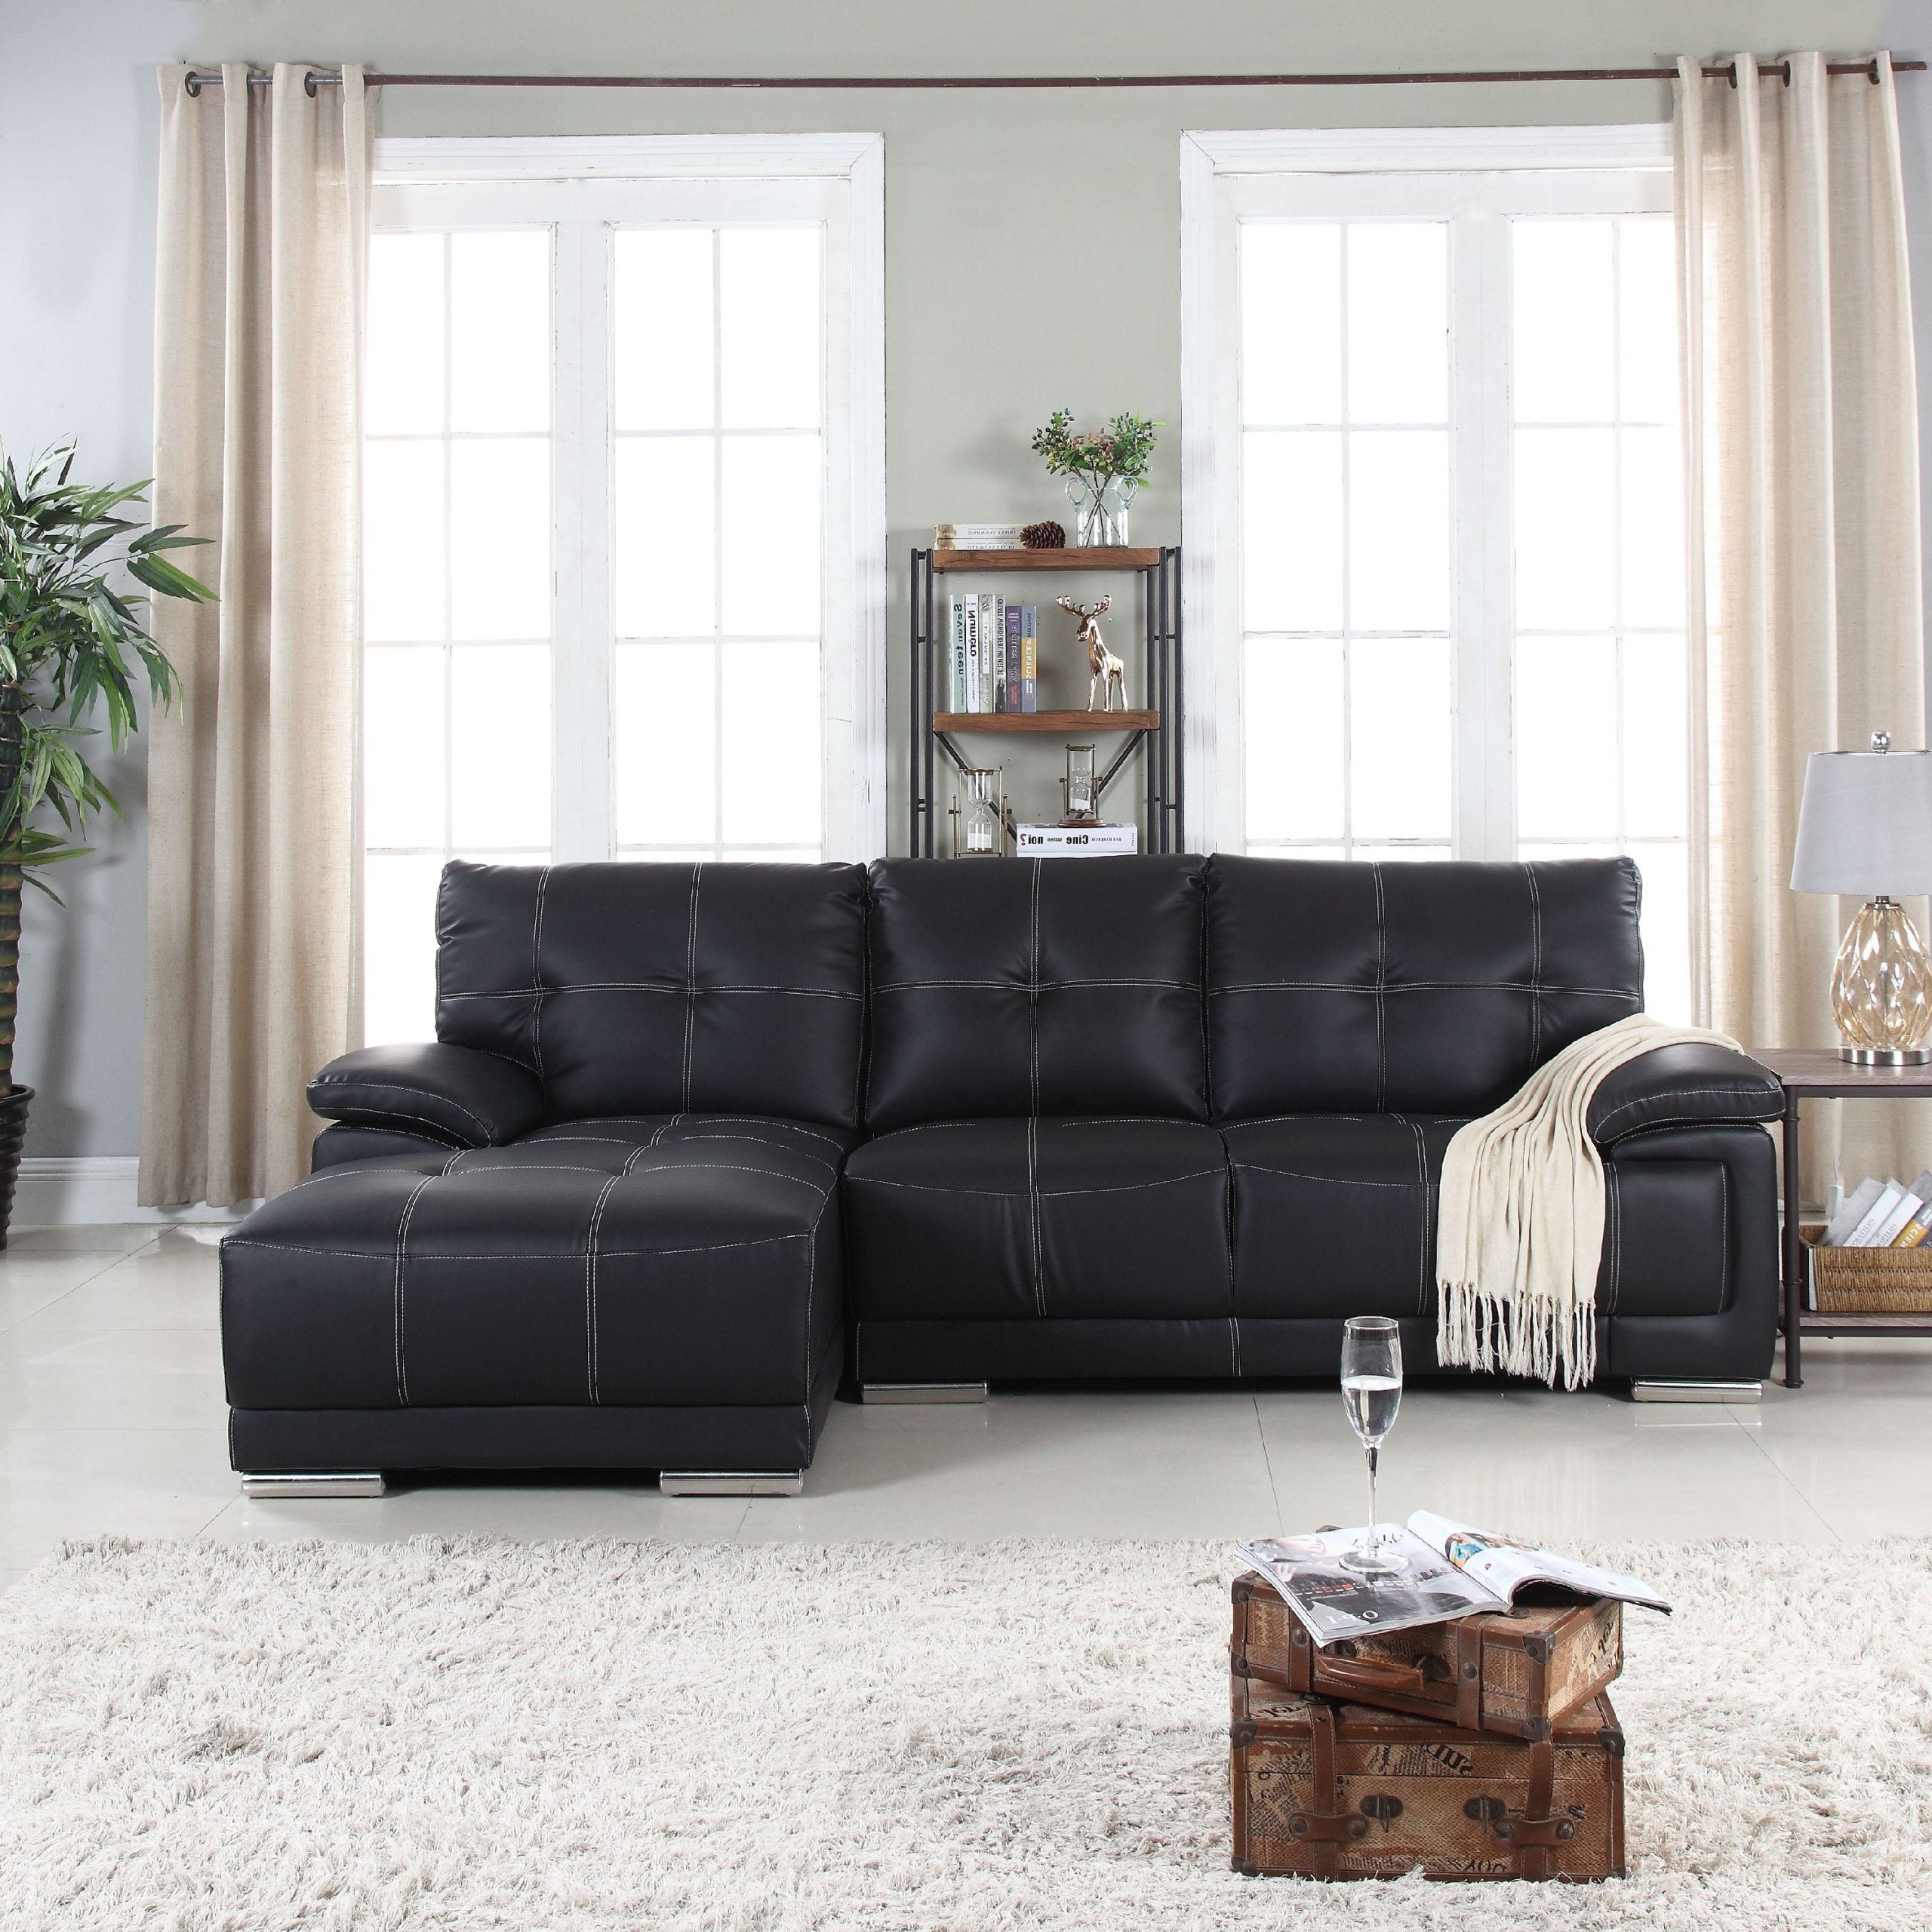 Classic Tufted Faux Leather Sectional Sofa – Walmart Throughout Faux Leather Sectional Sofa Sets (View 17 of 20)